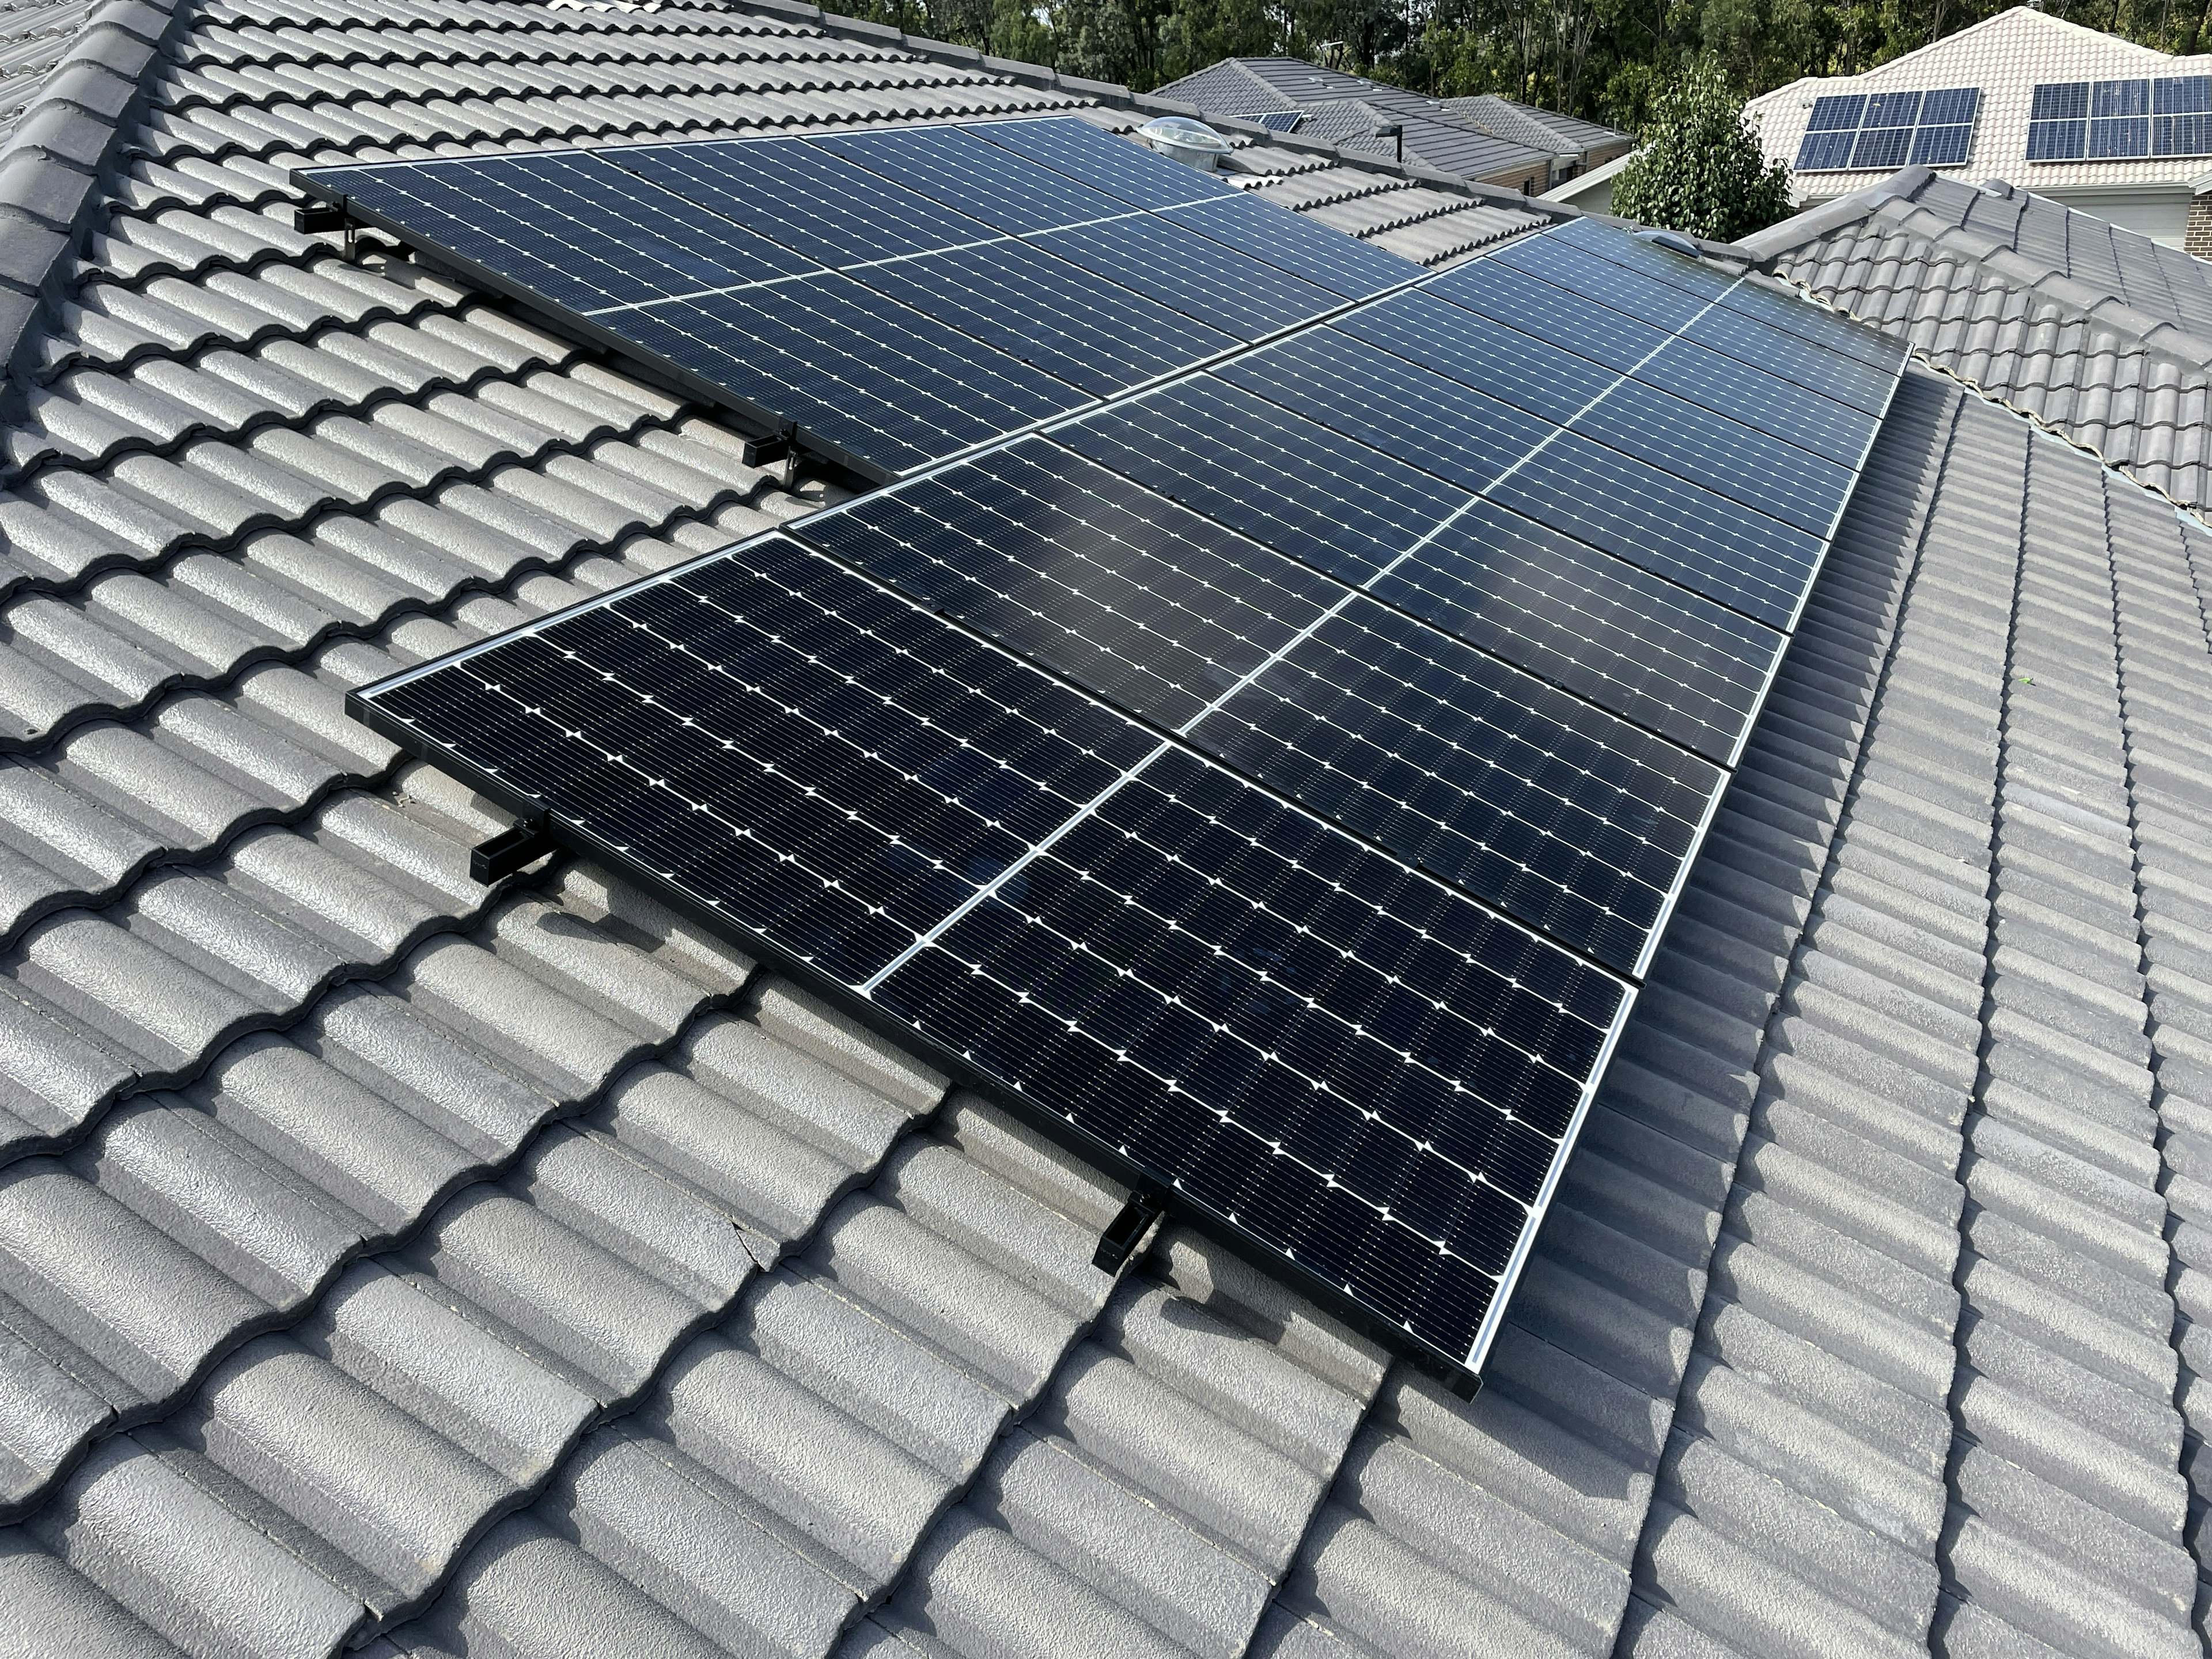 5kW LG solar panel system installed on a roof